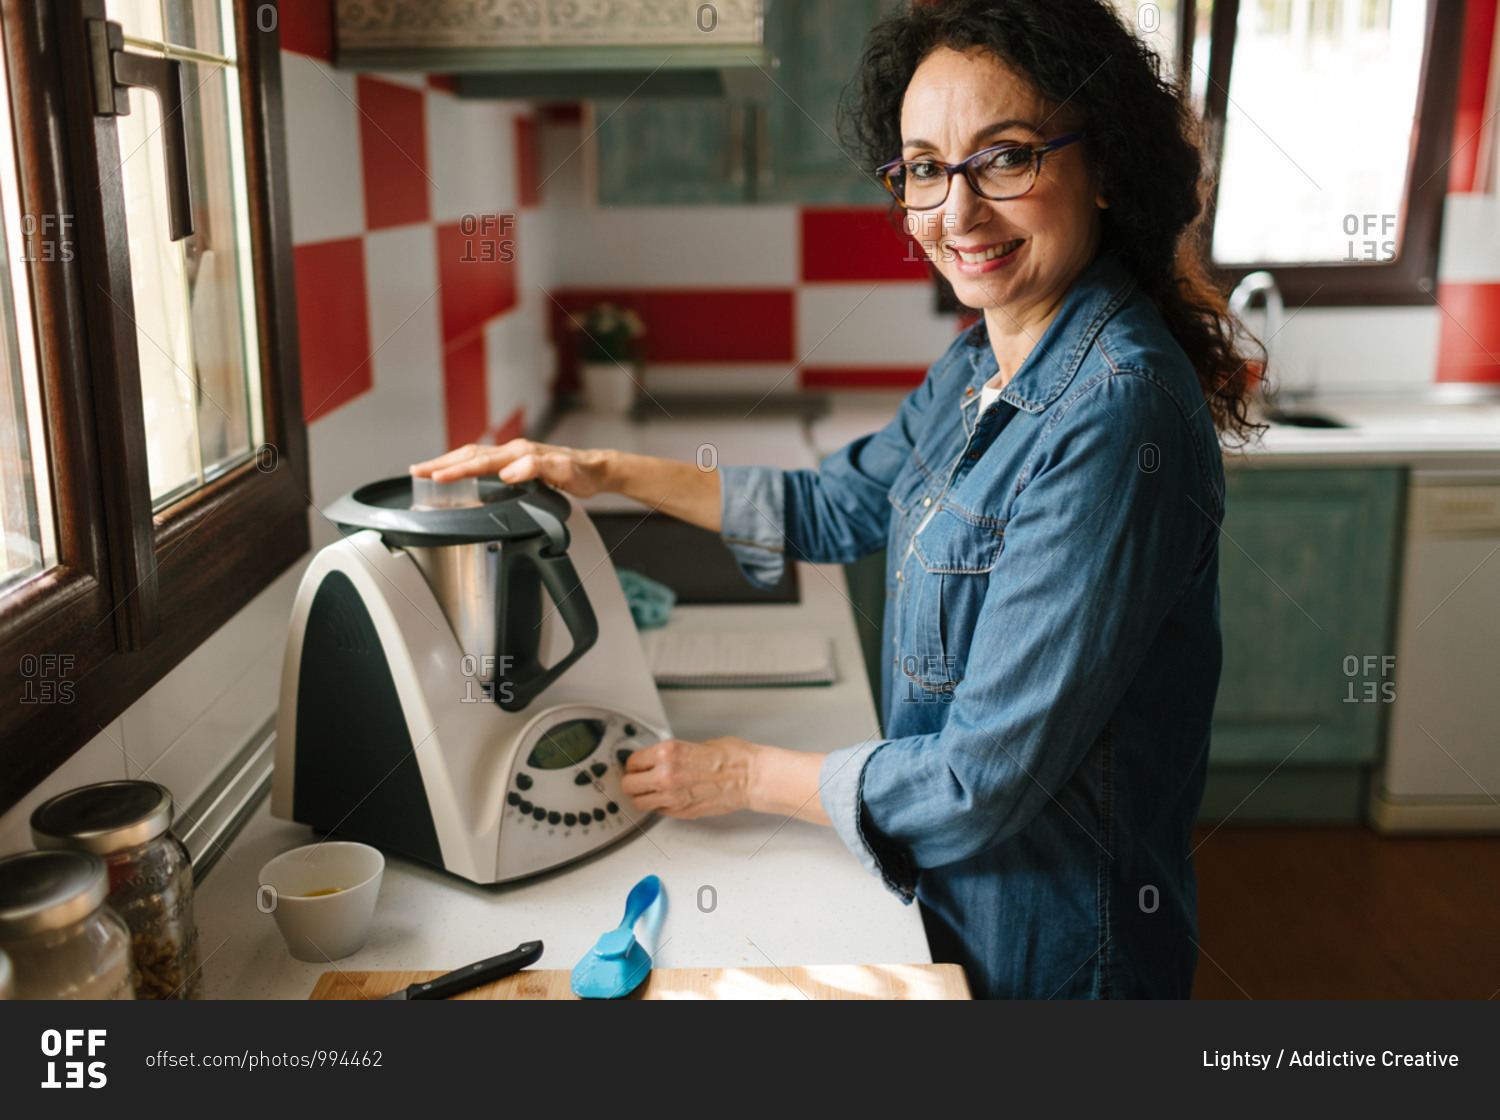 Smiley middle-aged woman cooking with a kitchen robot